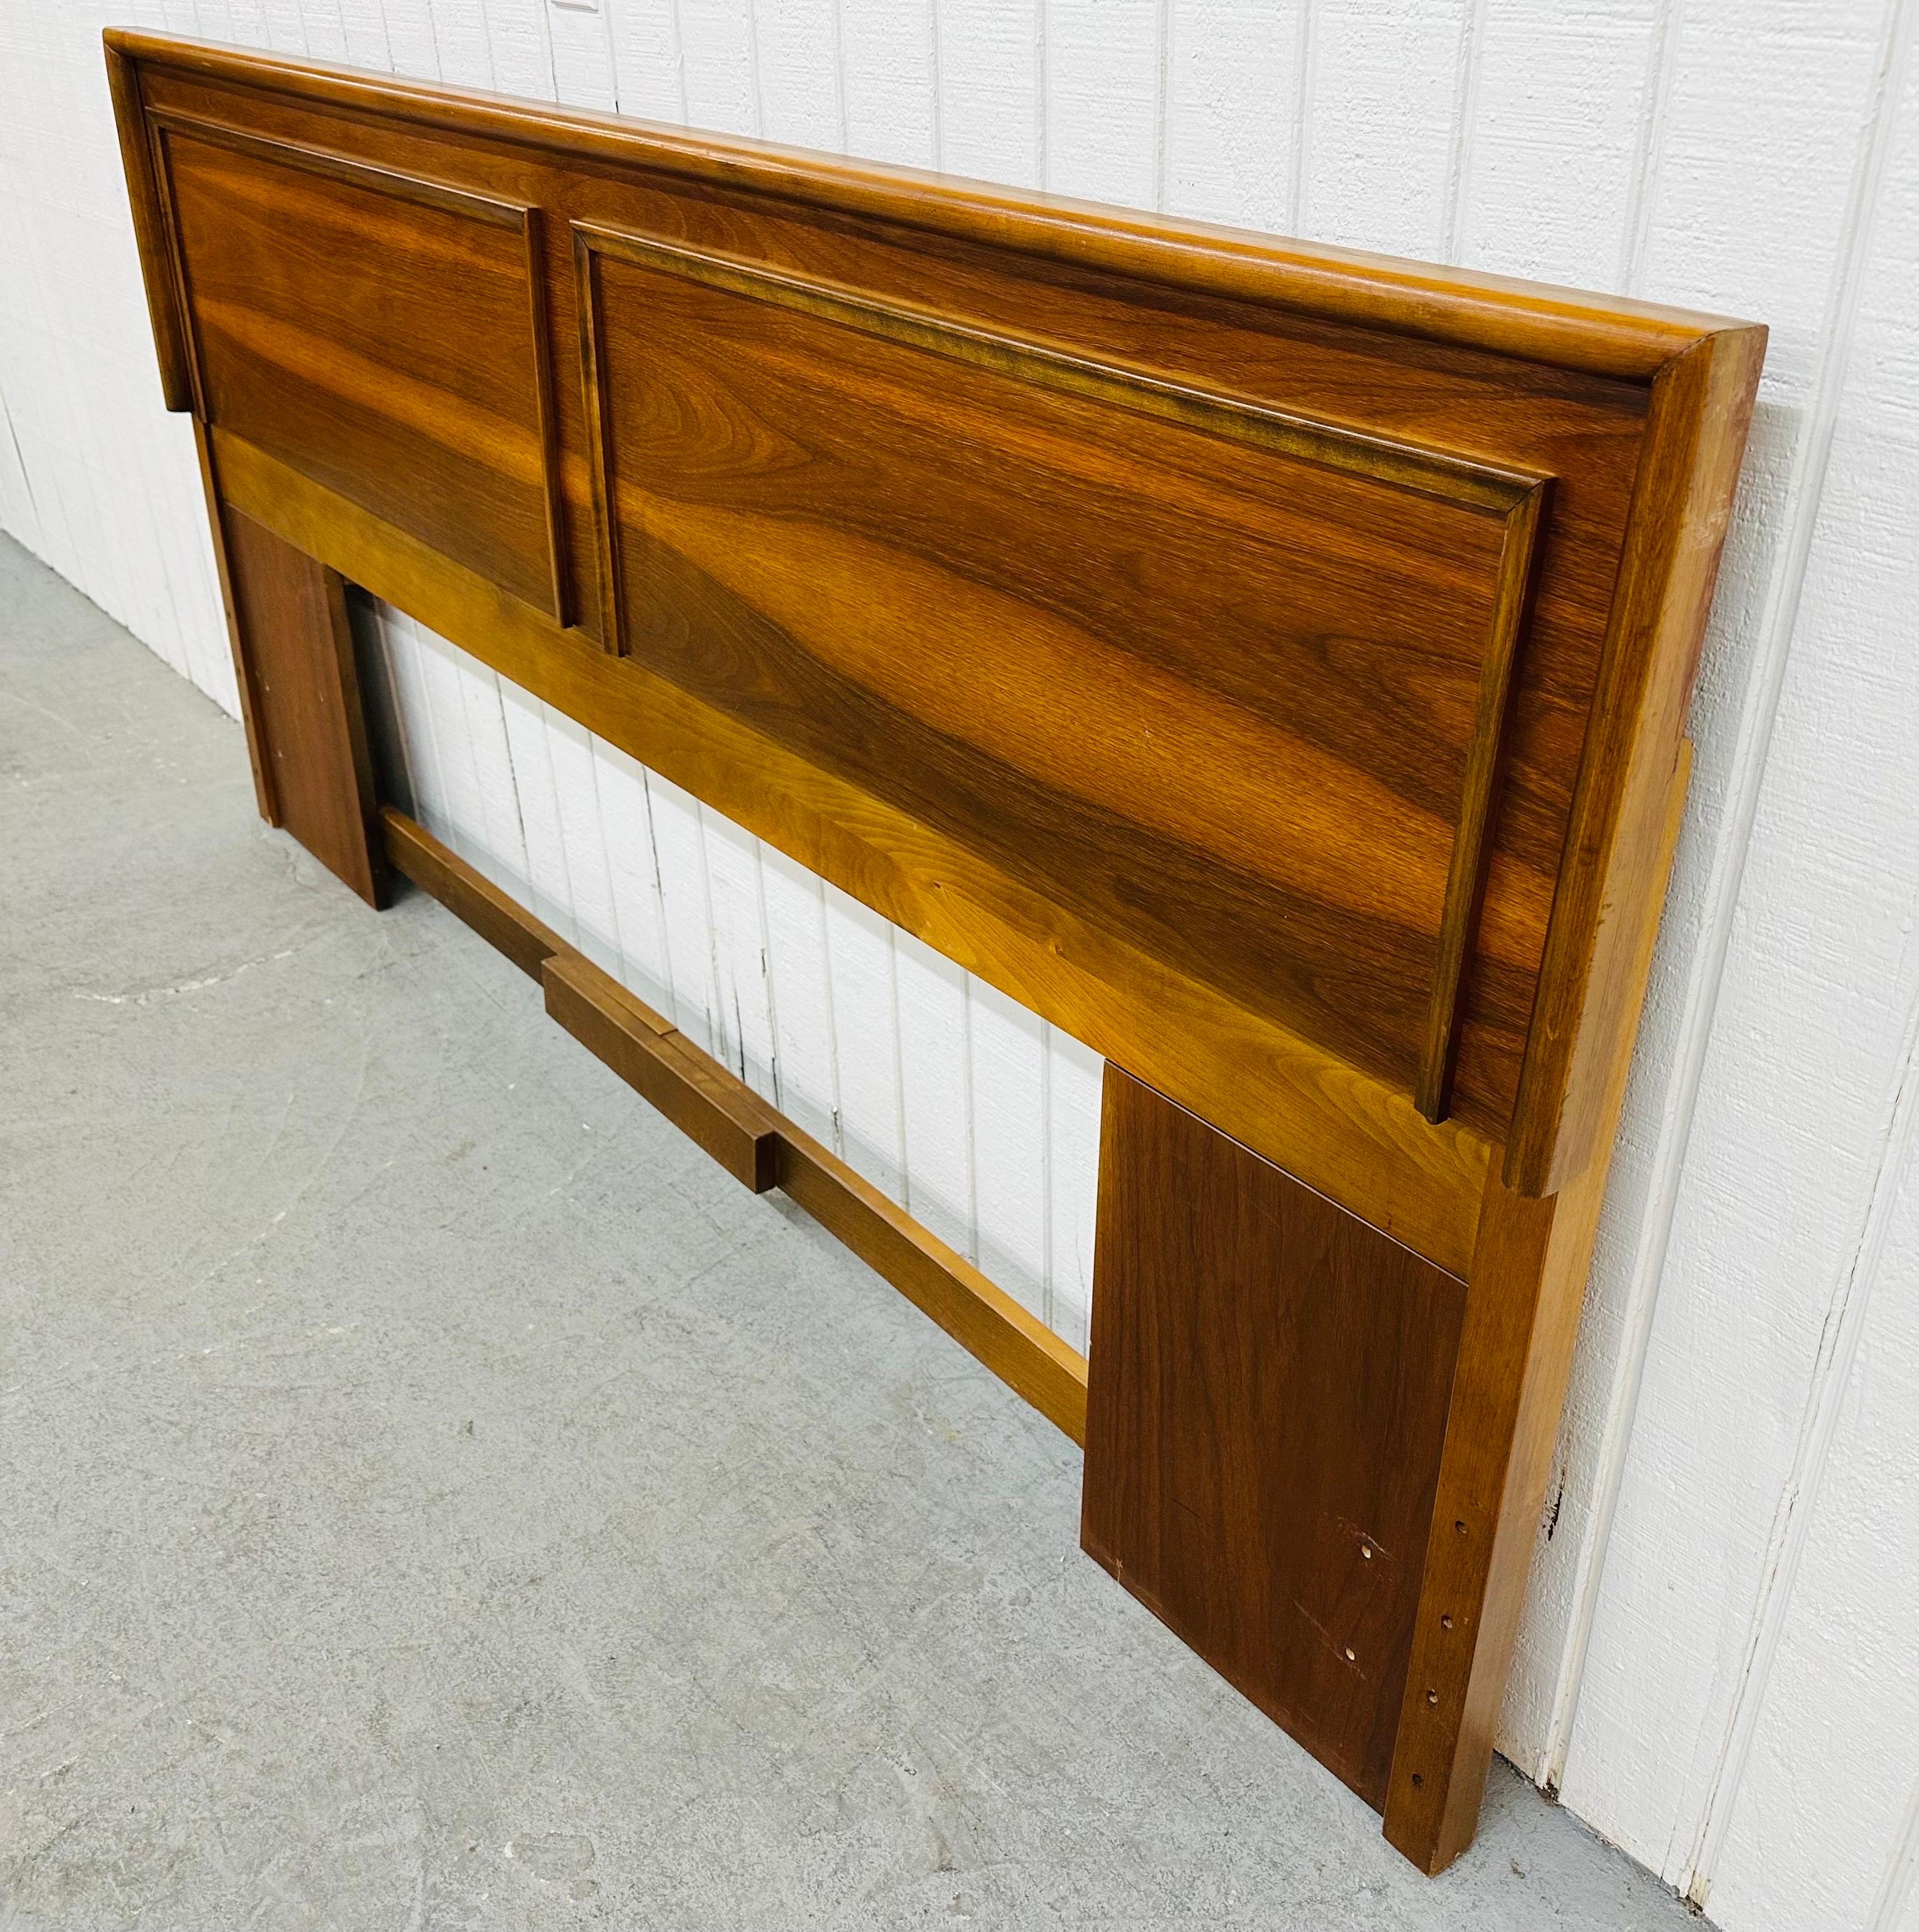 This listing is for a Mid-Century Modern Walnut King Size Headboard. Featuring a straight line design, trim accents on each side, beautiful walnut grain throughout the headboard, and a walnut finish! This is an exceptional combination of quality and